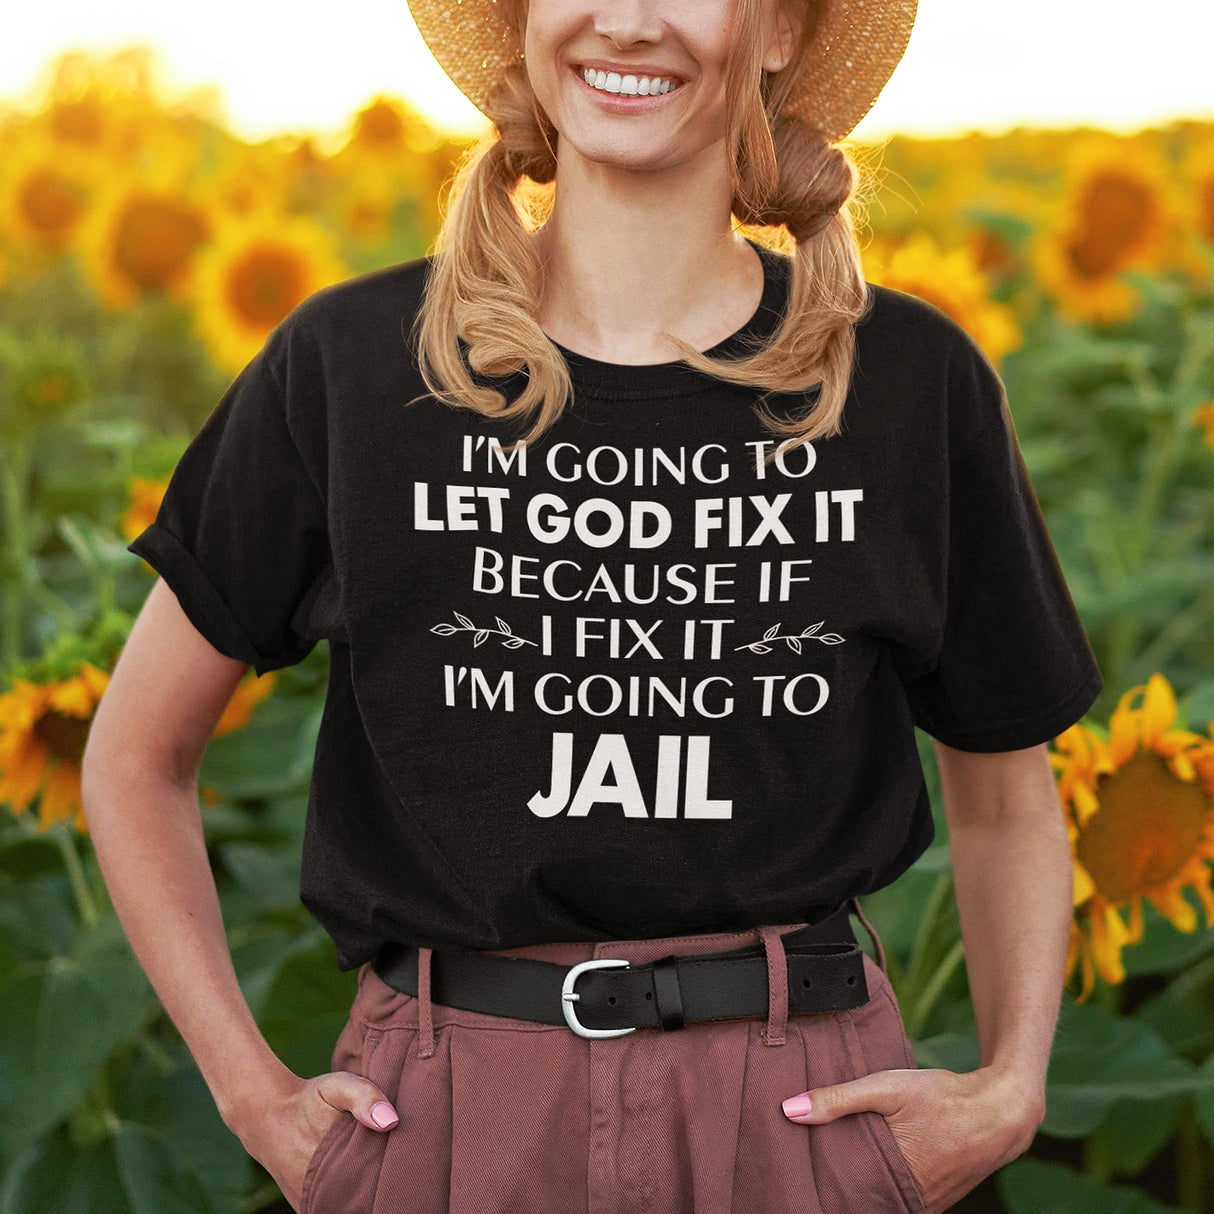 im-going-to-let-god-fix-it-because-if-i-fix-it-im-going-to-jail-faith-tee-faith-t-shirt-trust-tee-surrender-t-shirt-belief-tee#color_black